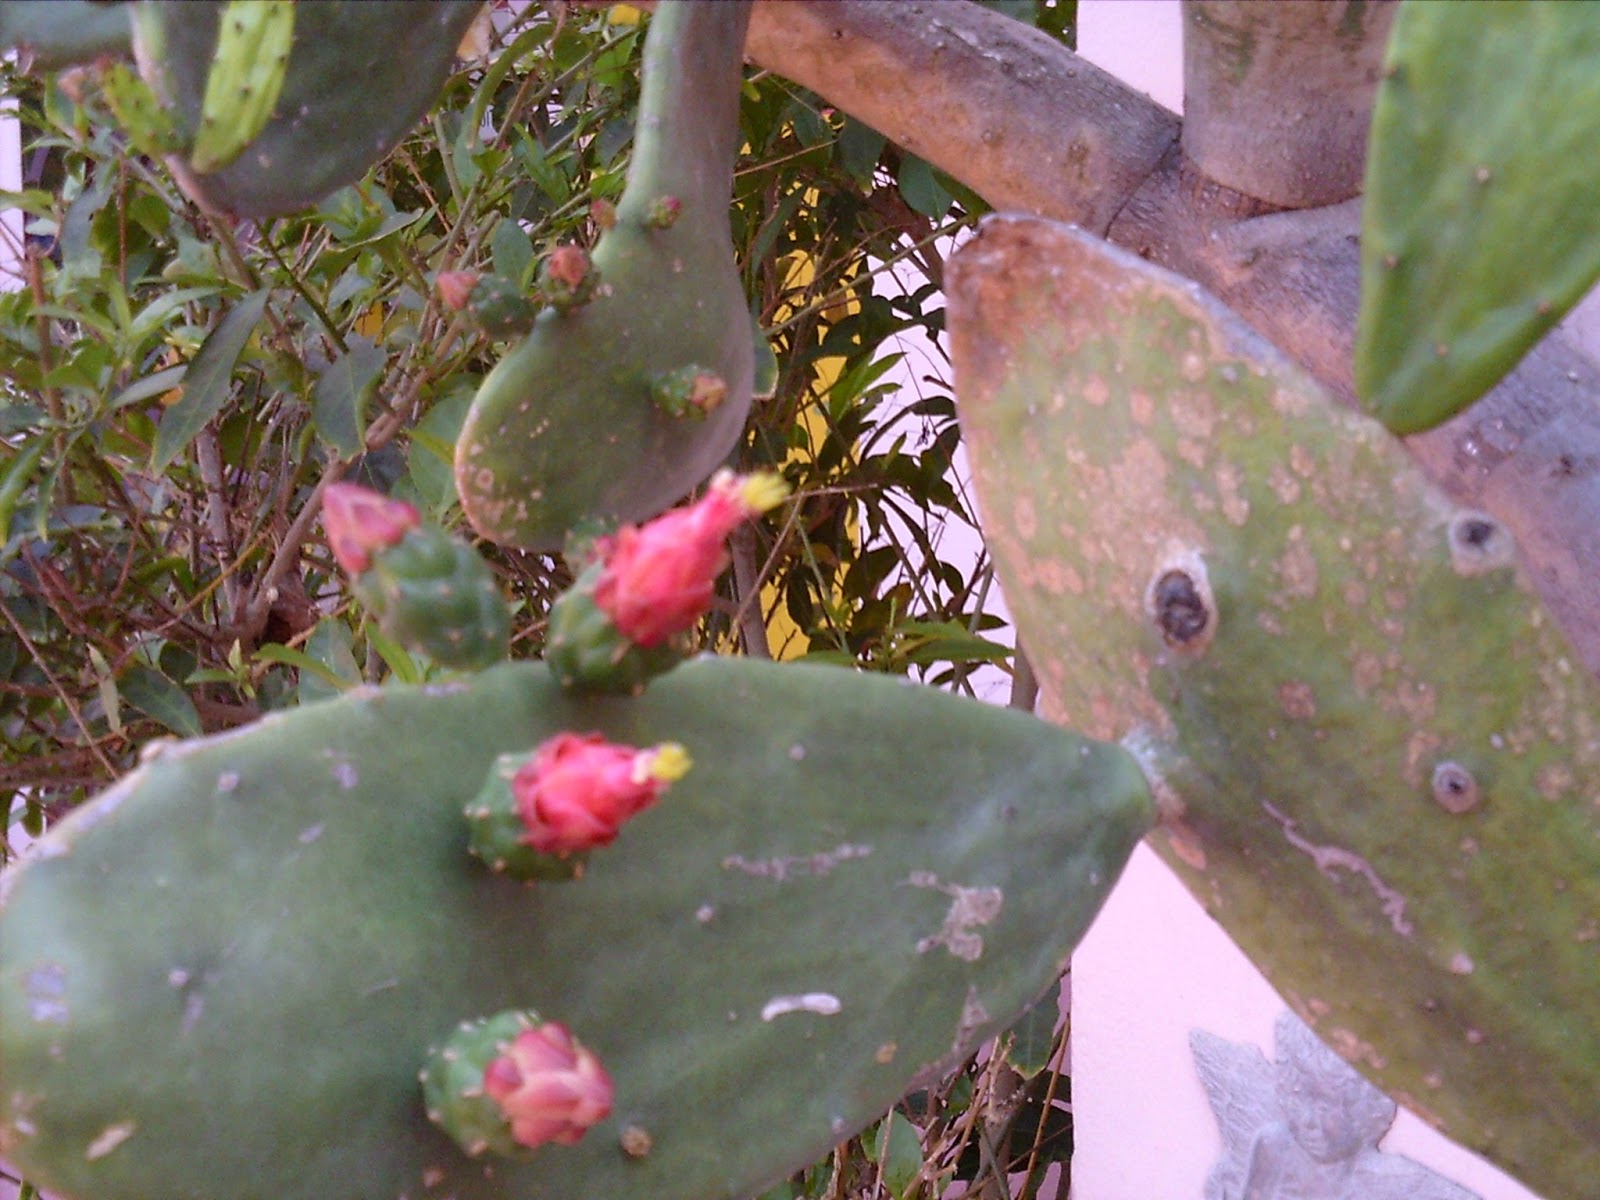 Lucy Sews Everyday: CACTUS PLANT FROM FLORIDA